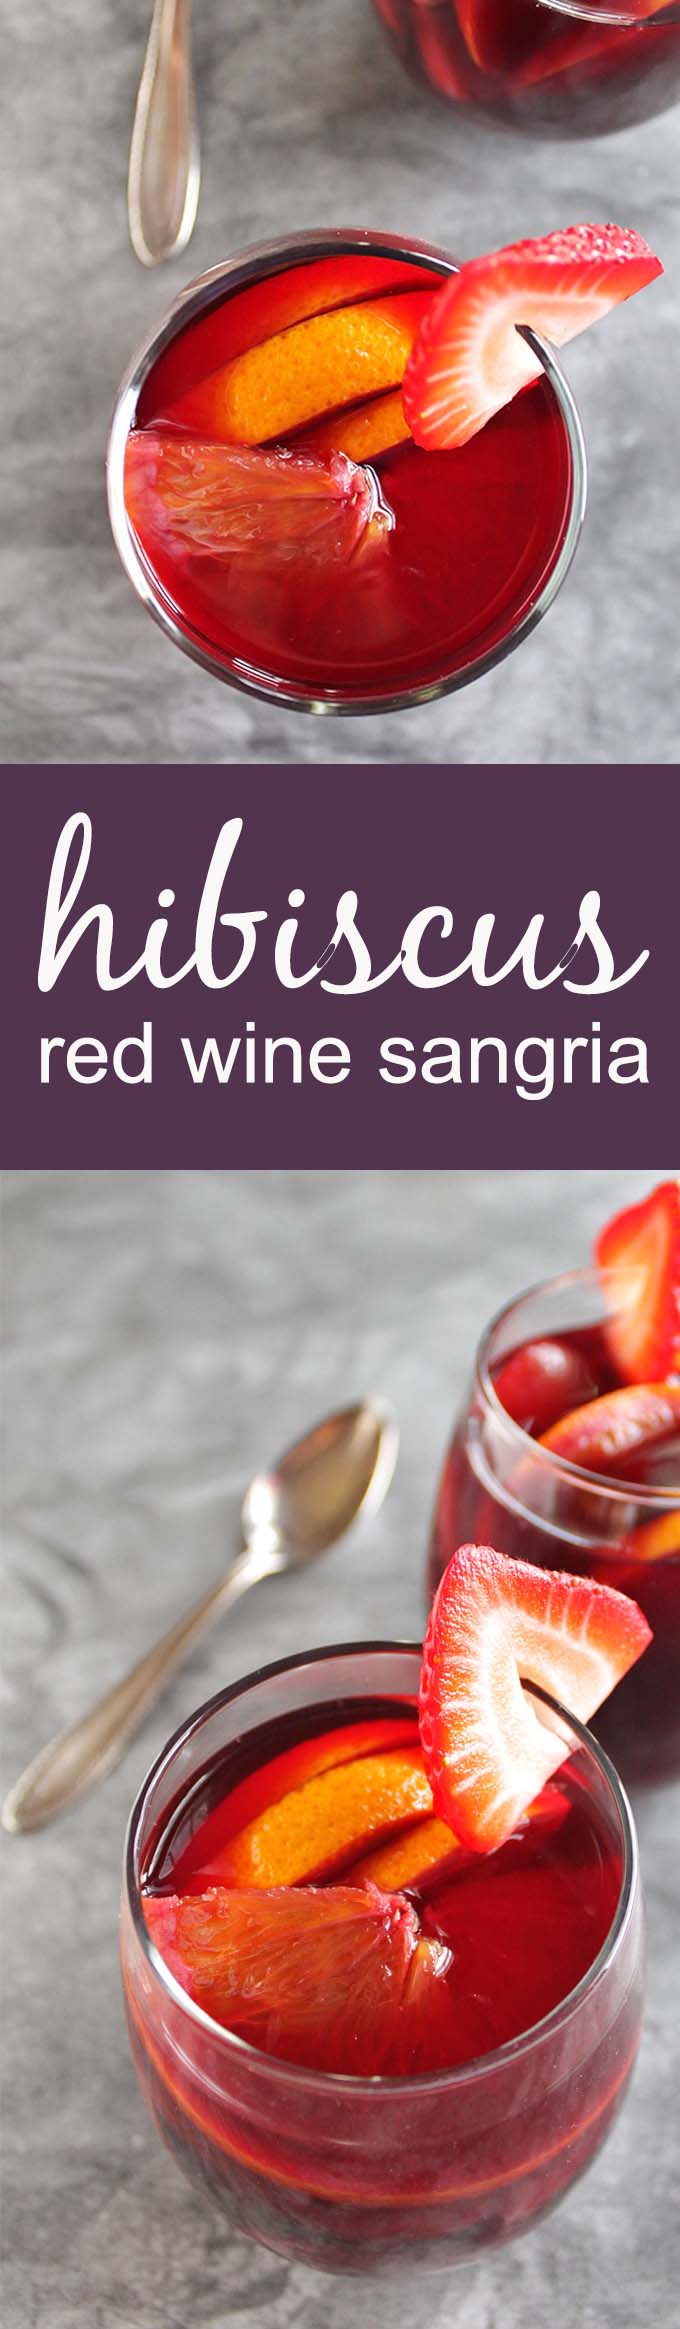 Hibiscus Red Wine Sangria - A fruity sangria with a hint of floral tartness from hibiscus tea. This recipe is great for spring and summertime parties. It's refreshing and festive. Gluten Free/Vegan | robustrecipes.com